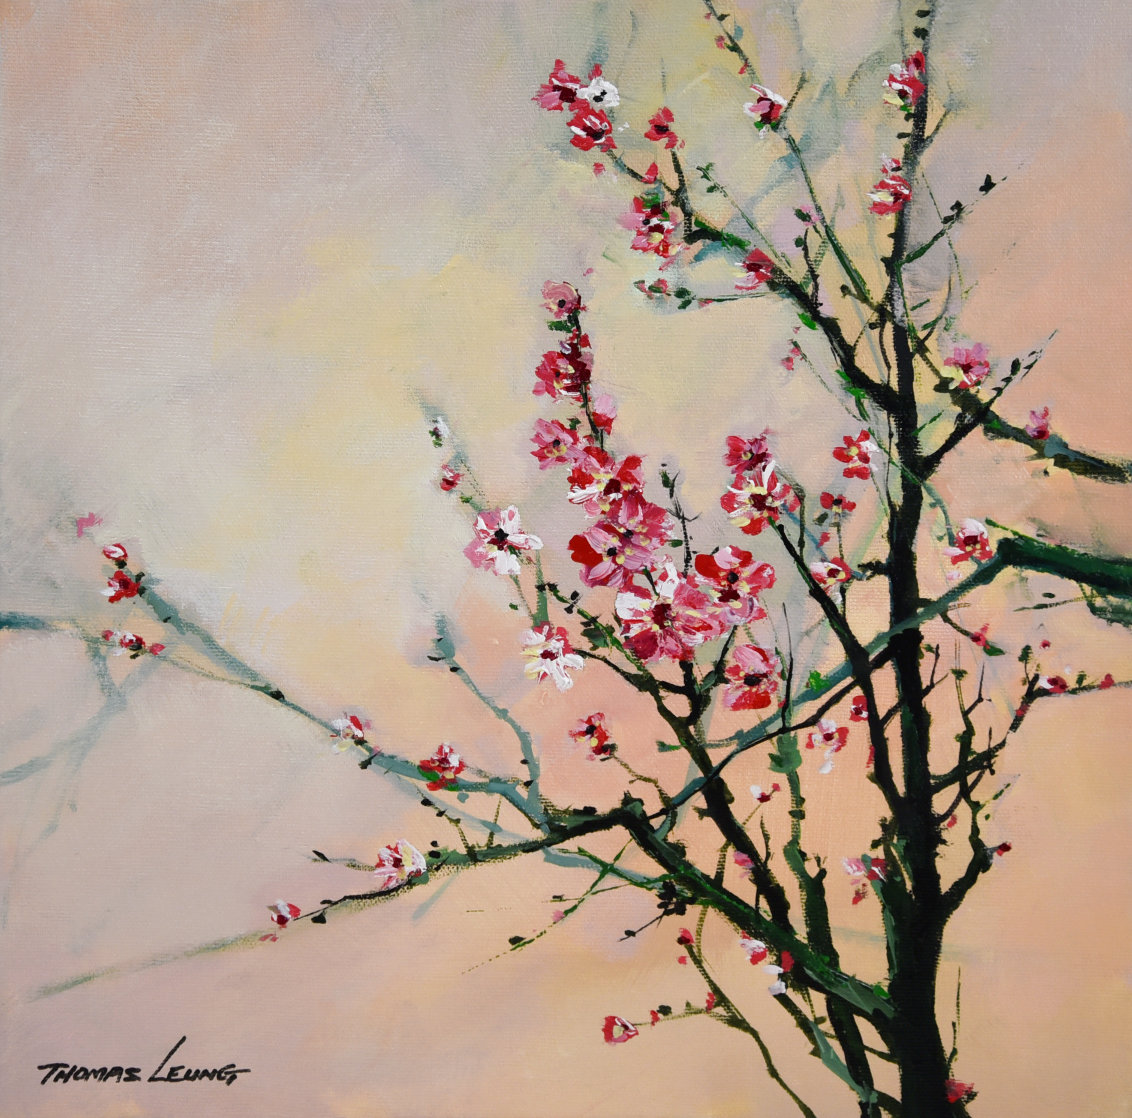 Little Blossom 2021 16x16 Original Painting by Thomas Leung